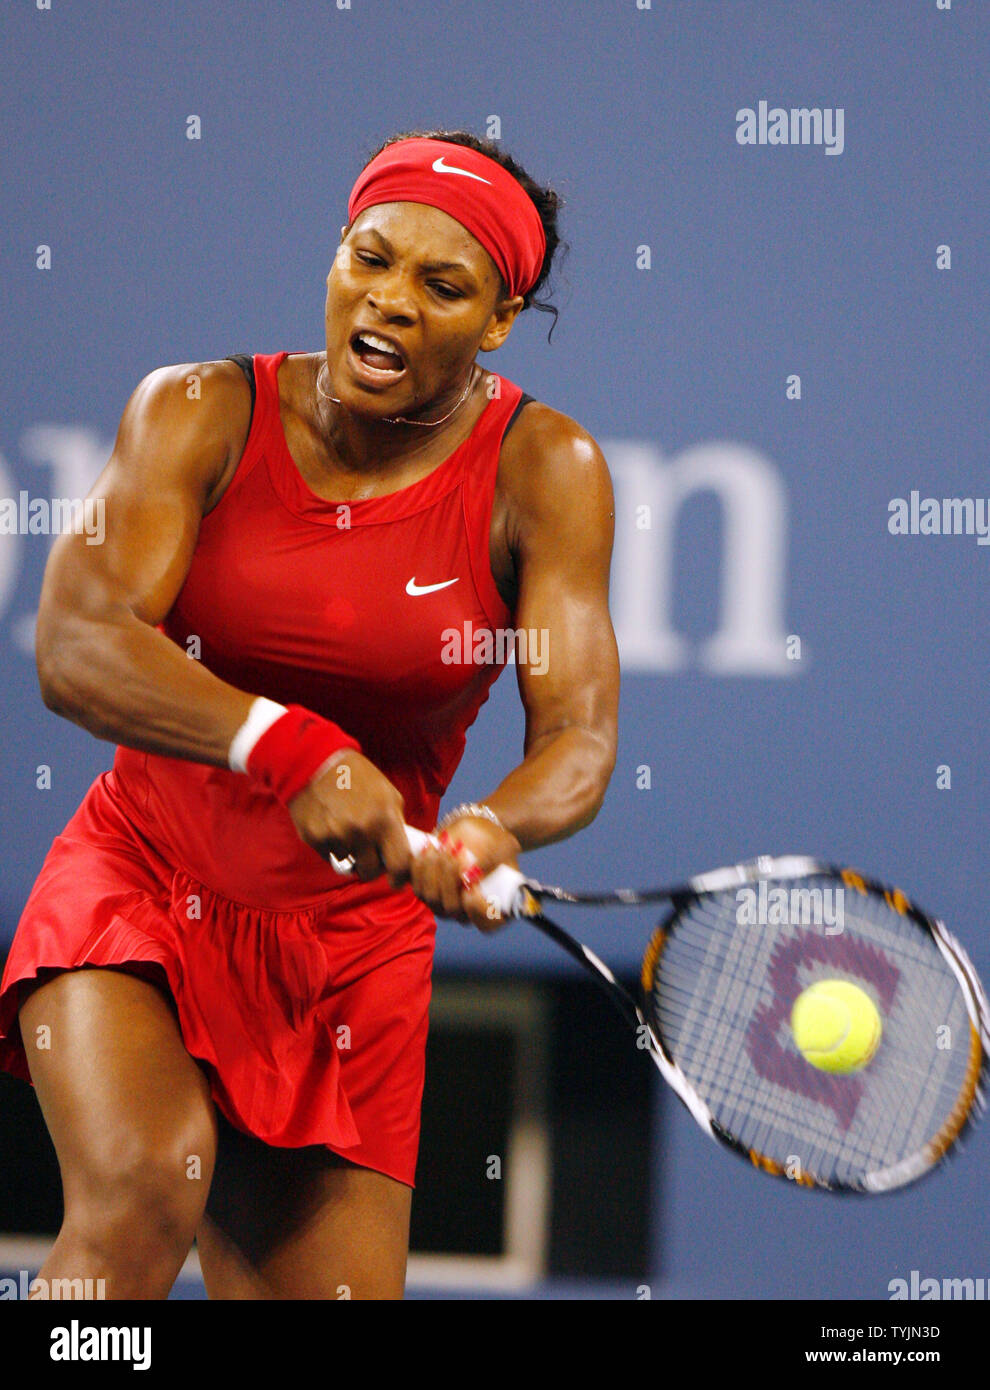 Serena Williams hits a backhand in her match against Severine Bremond on day eight at the U.S. Open Tennis Championships at the U.S. National Tennis Center in Flushing Meadows, New York on September 1, 2008. Williams defeated Bremond 6-2 6-2.         (UPI Photo/John Angelillo) Stock Photo